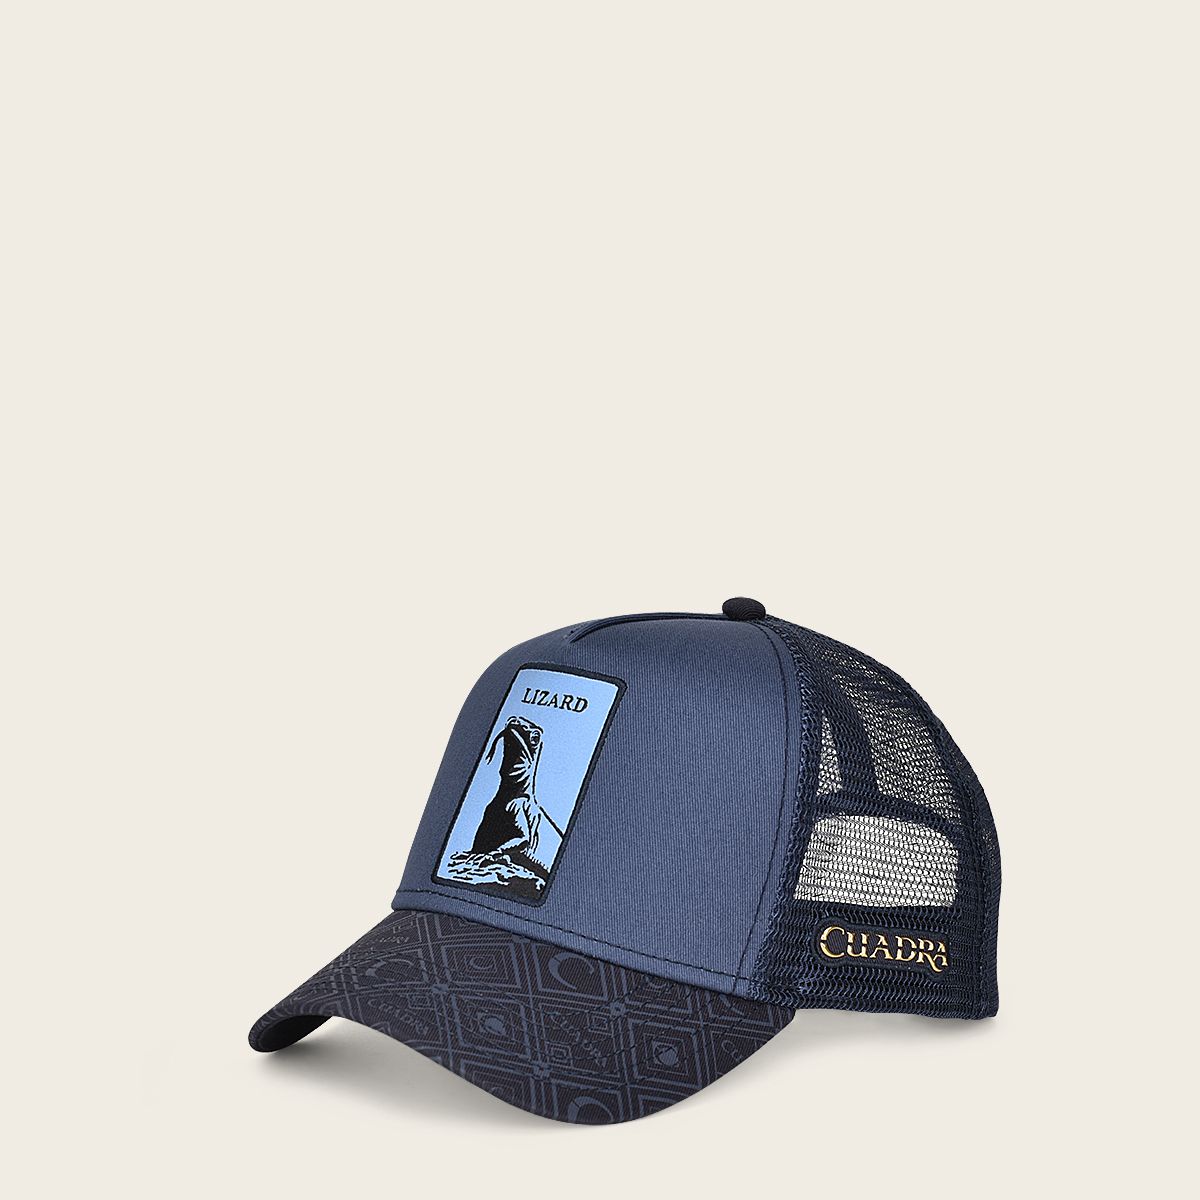 Blue snapback cap with lizzard patch 1.5